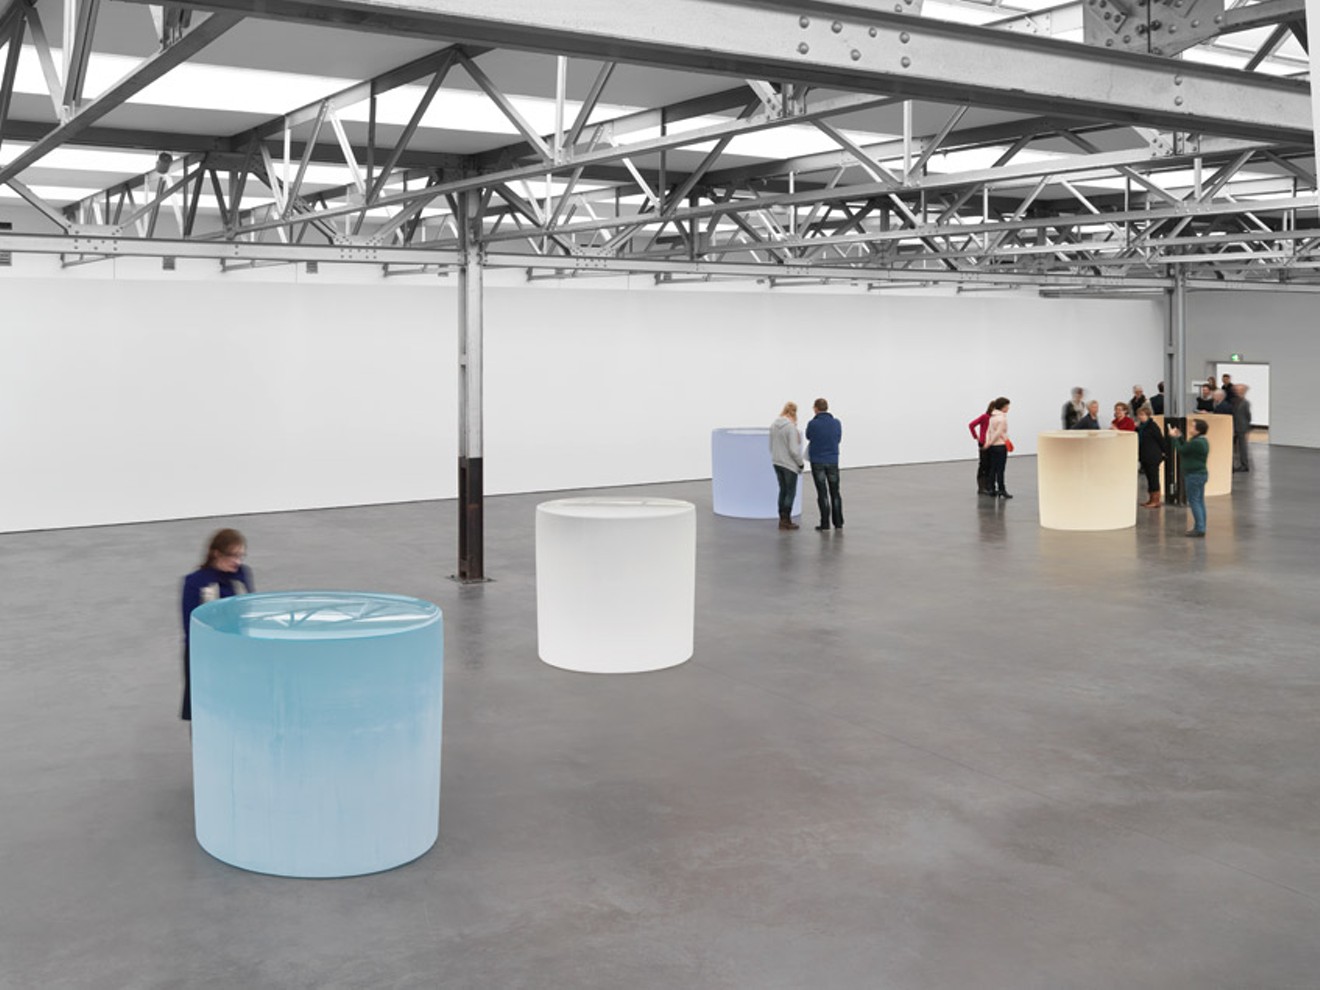 Check out the Roni Horn exhibit at the Nasher Sculpture Center this week.